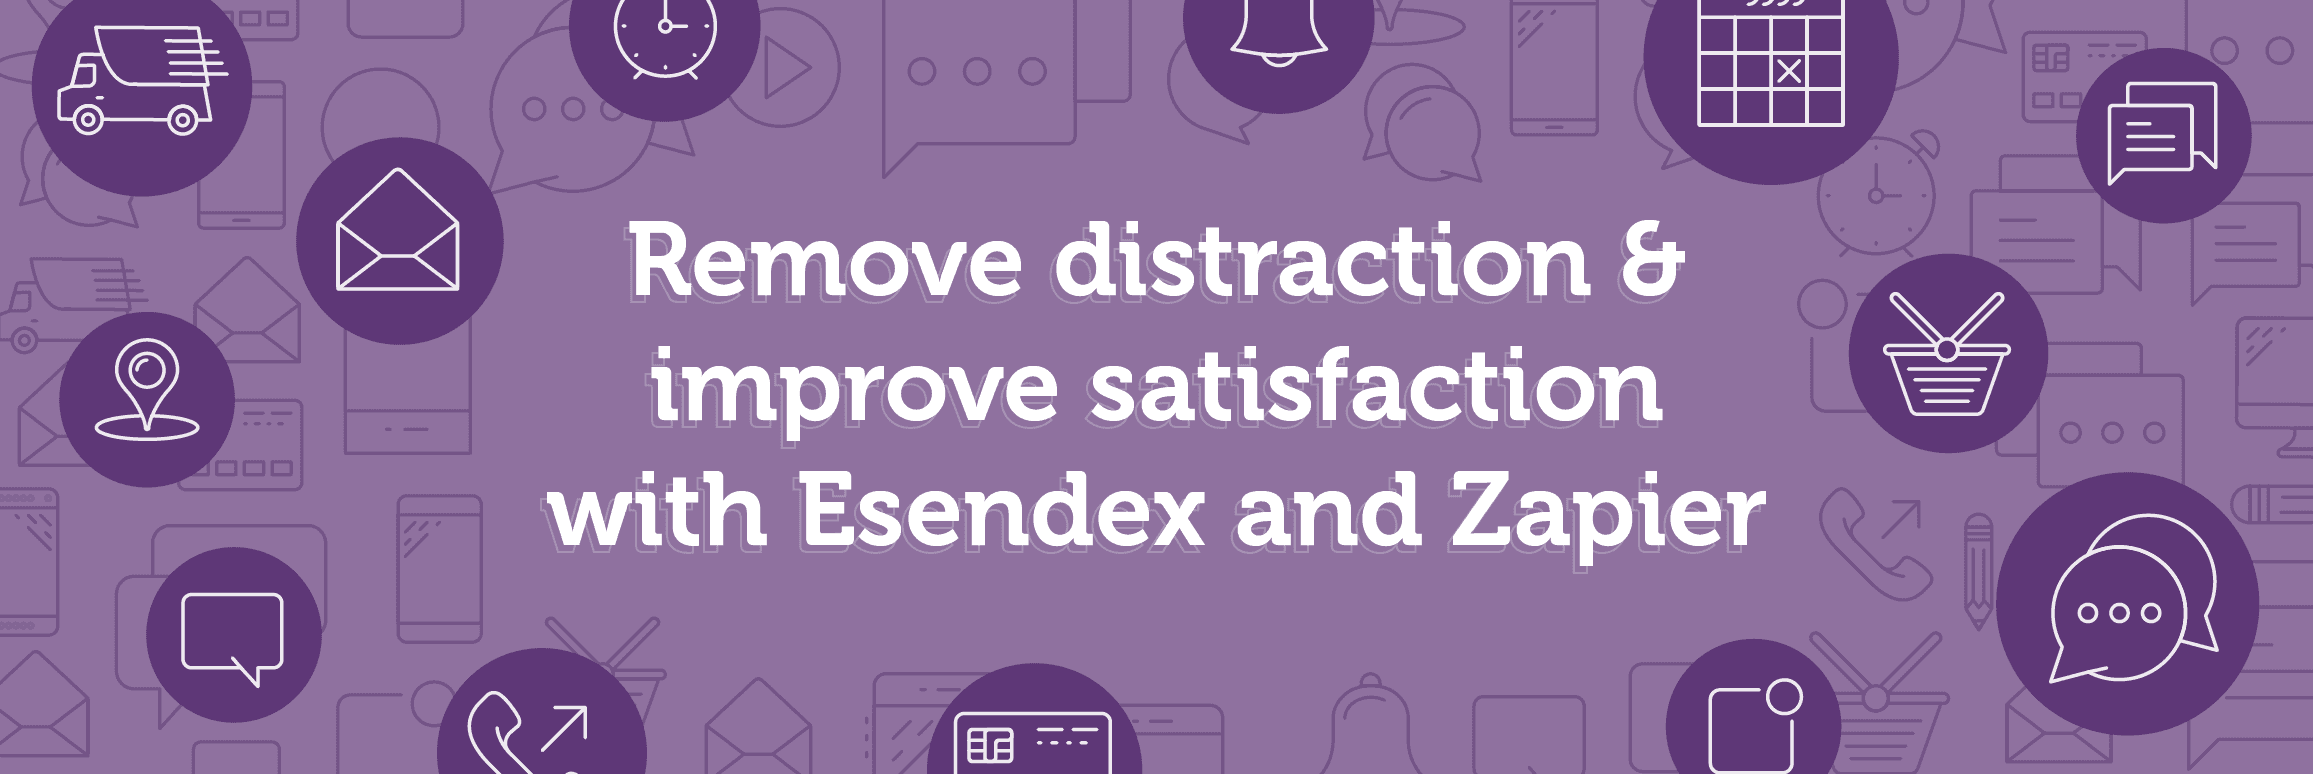 remove distraction and improve satisfaction with Esendex and Zapier